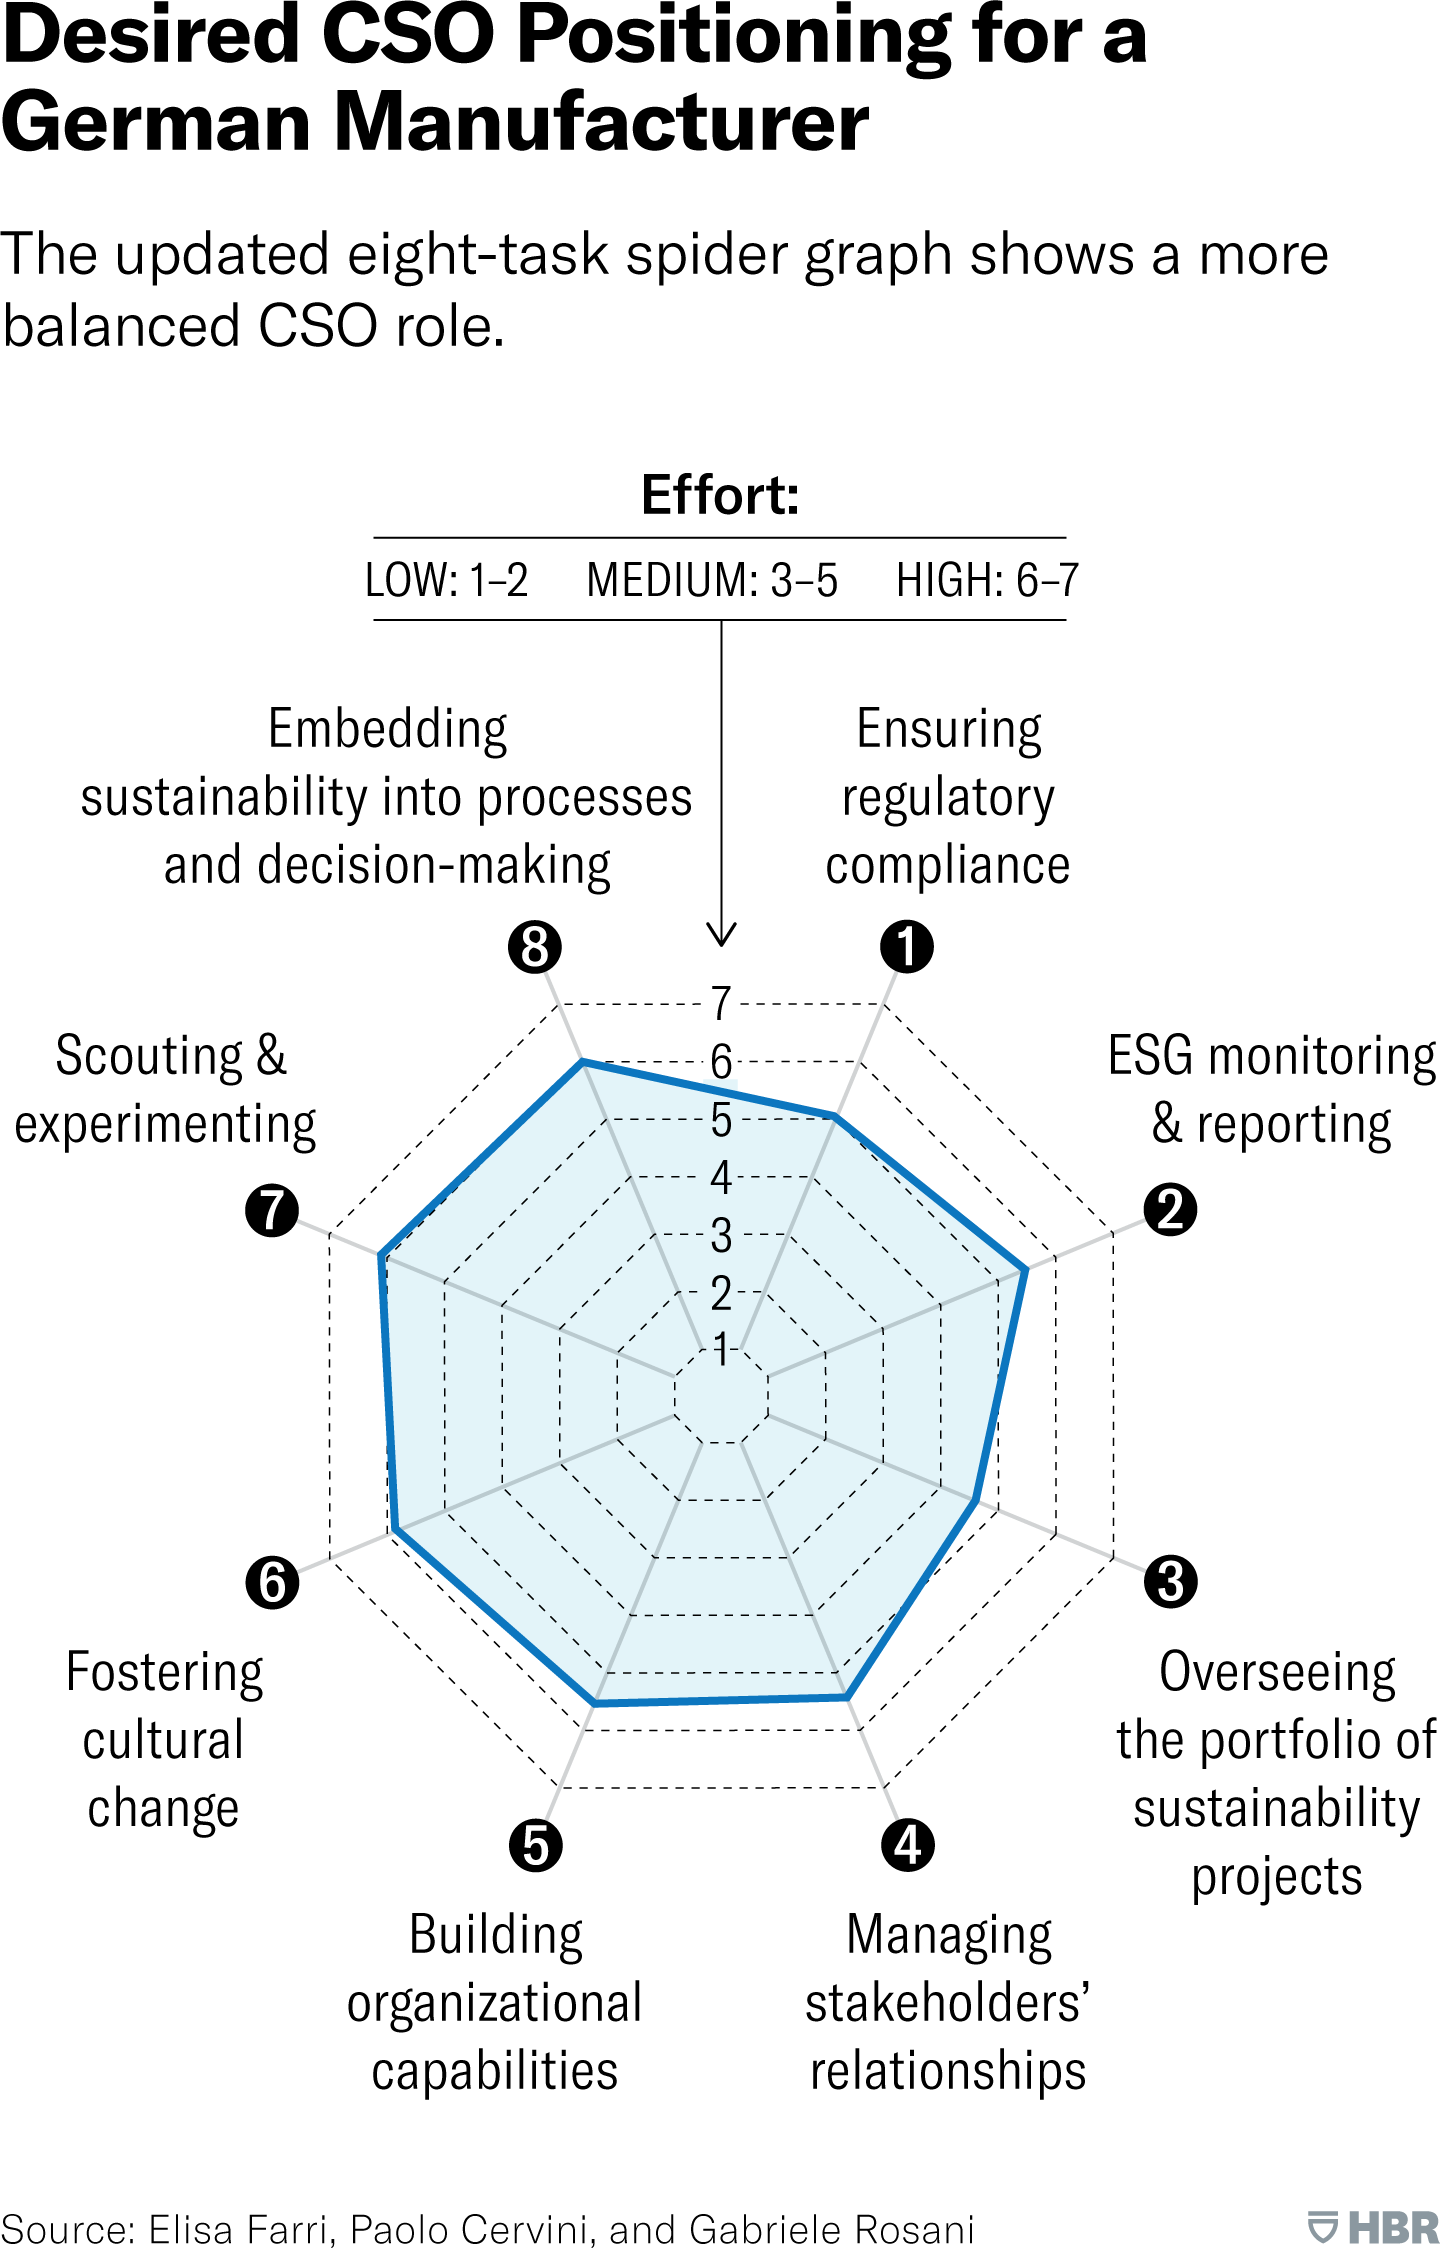 The updated 8-task spider graph shows a more balanced CSO role. Returning to the eight tasks described in the previous spider graph, the updated graph shows the desired effort to be spent on each. For example, task 6, fostering cultural change, was previously assigned level 1, or low effort, and is now assigned level 6, or high effort. In this example, the graph indicates that the German manufacturer is almost equally focused on all eight tasks.